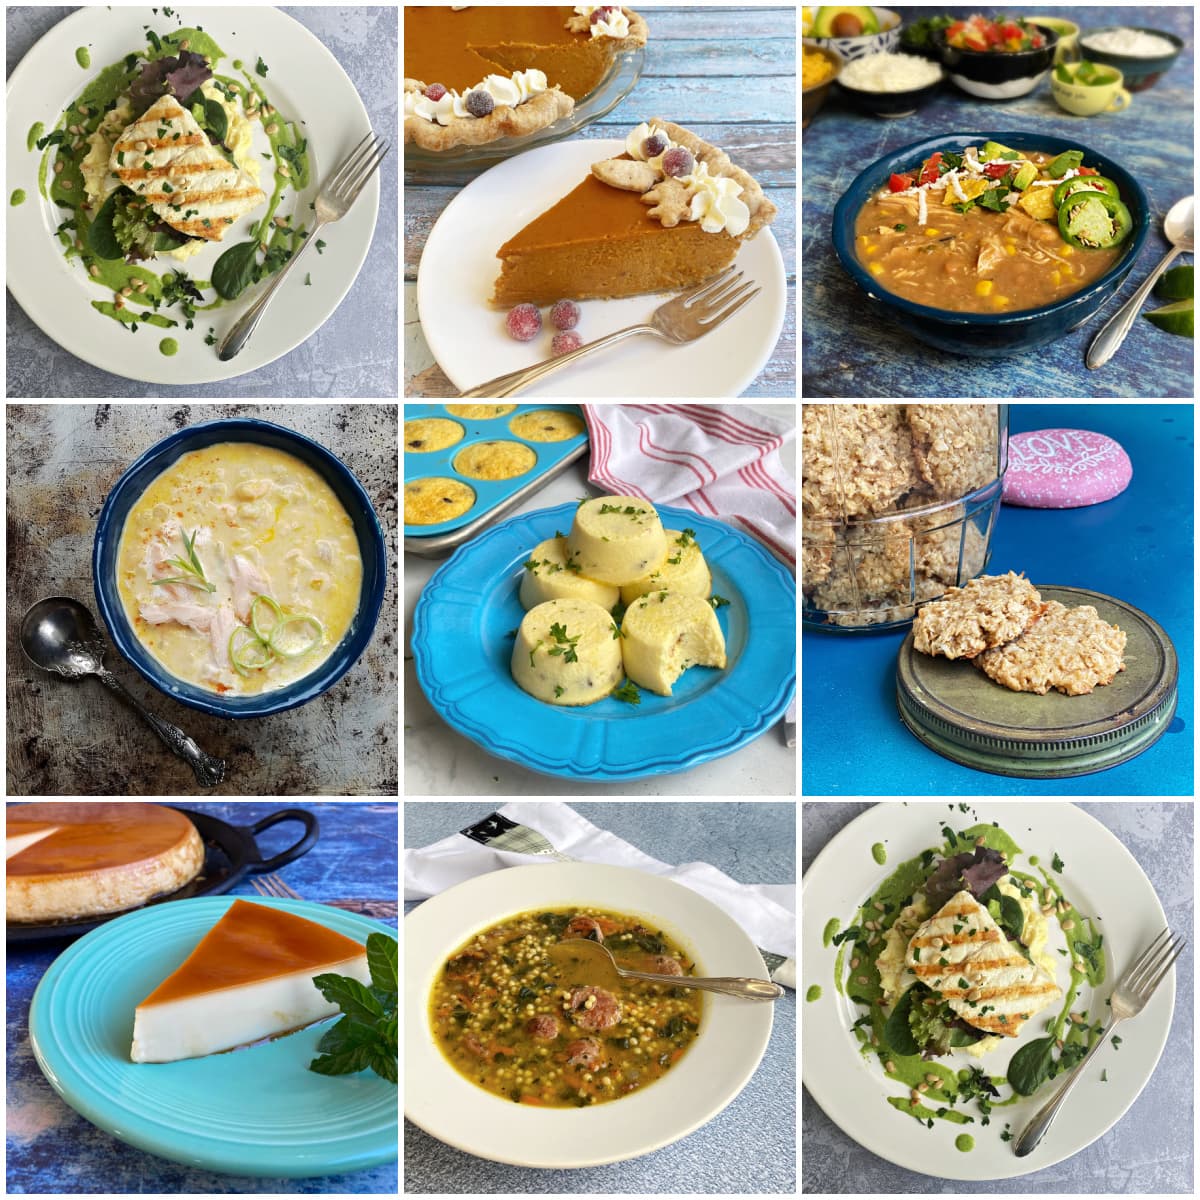 9-panel collage showing images of food and recipes from October Food Holidays calendar.